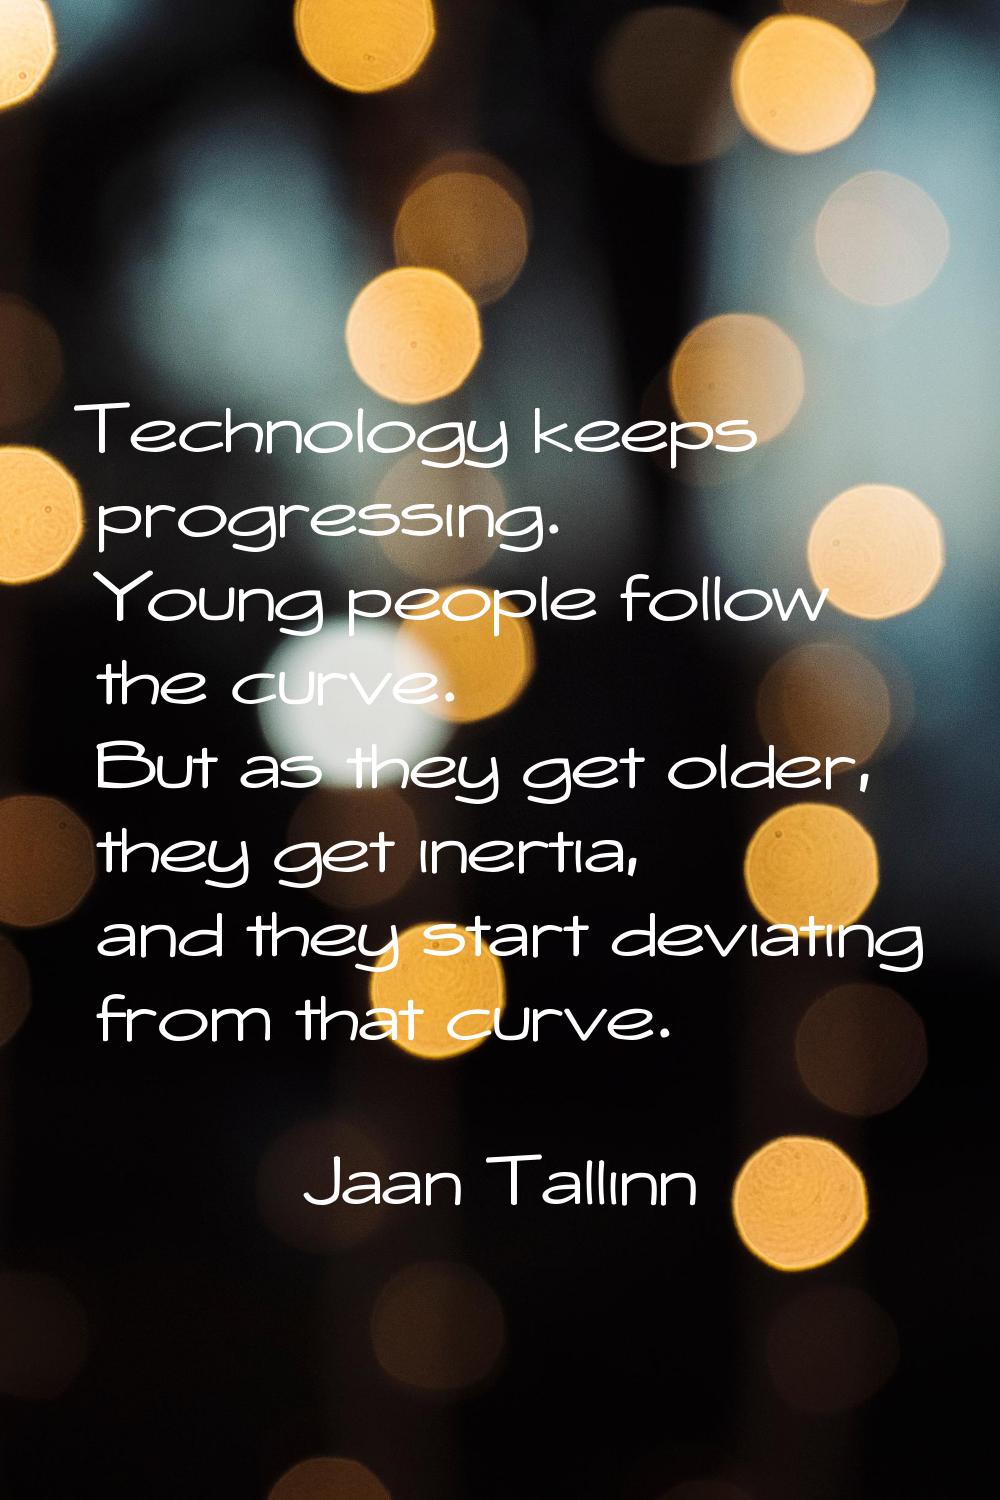 Technology keeps progressing. Young people follow the curve. But as they get older, they get inerti